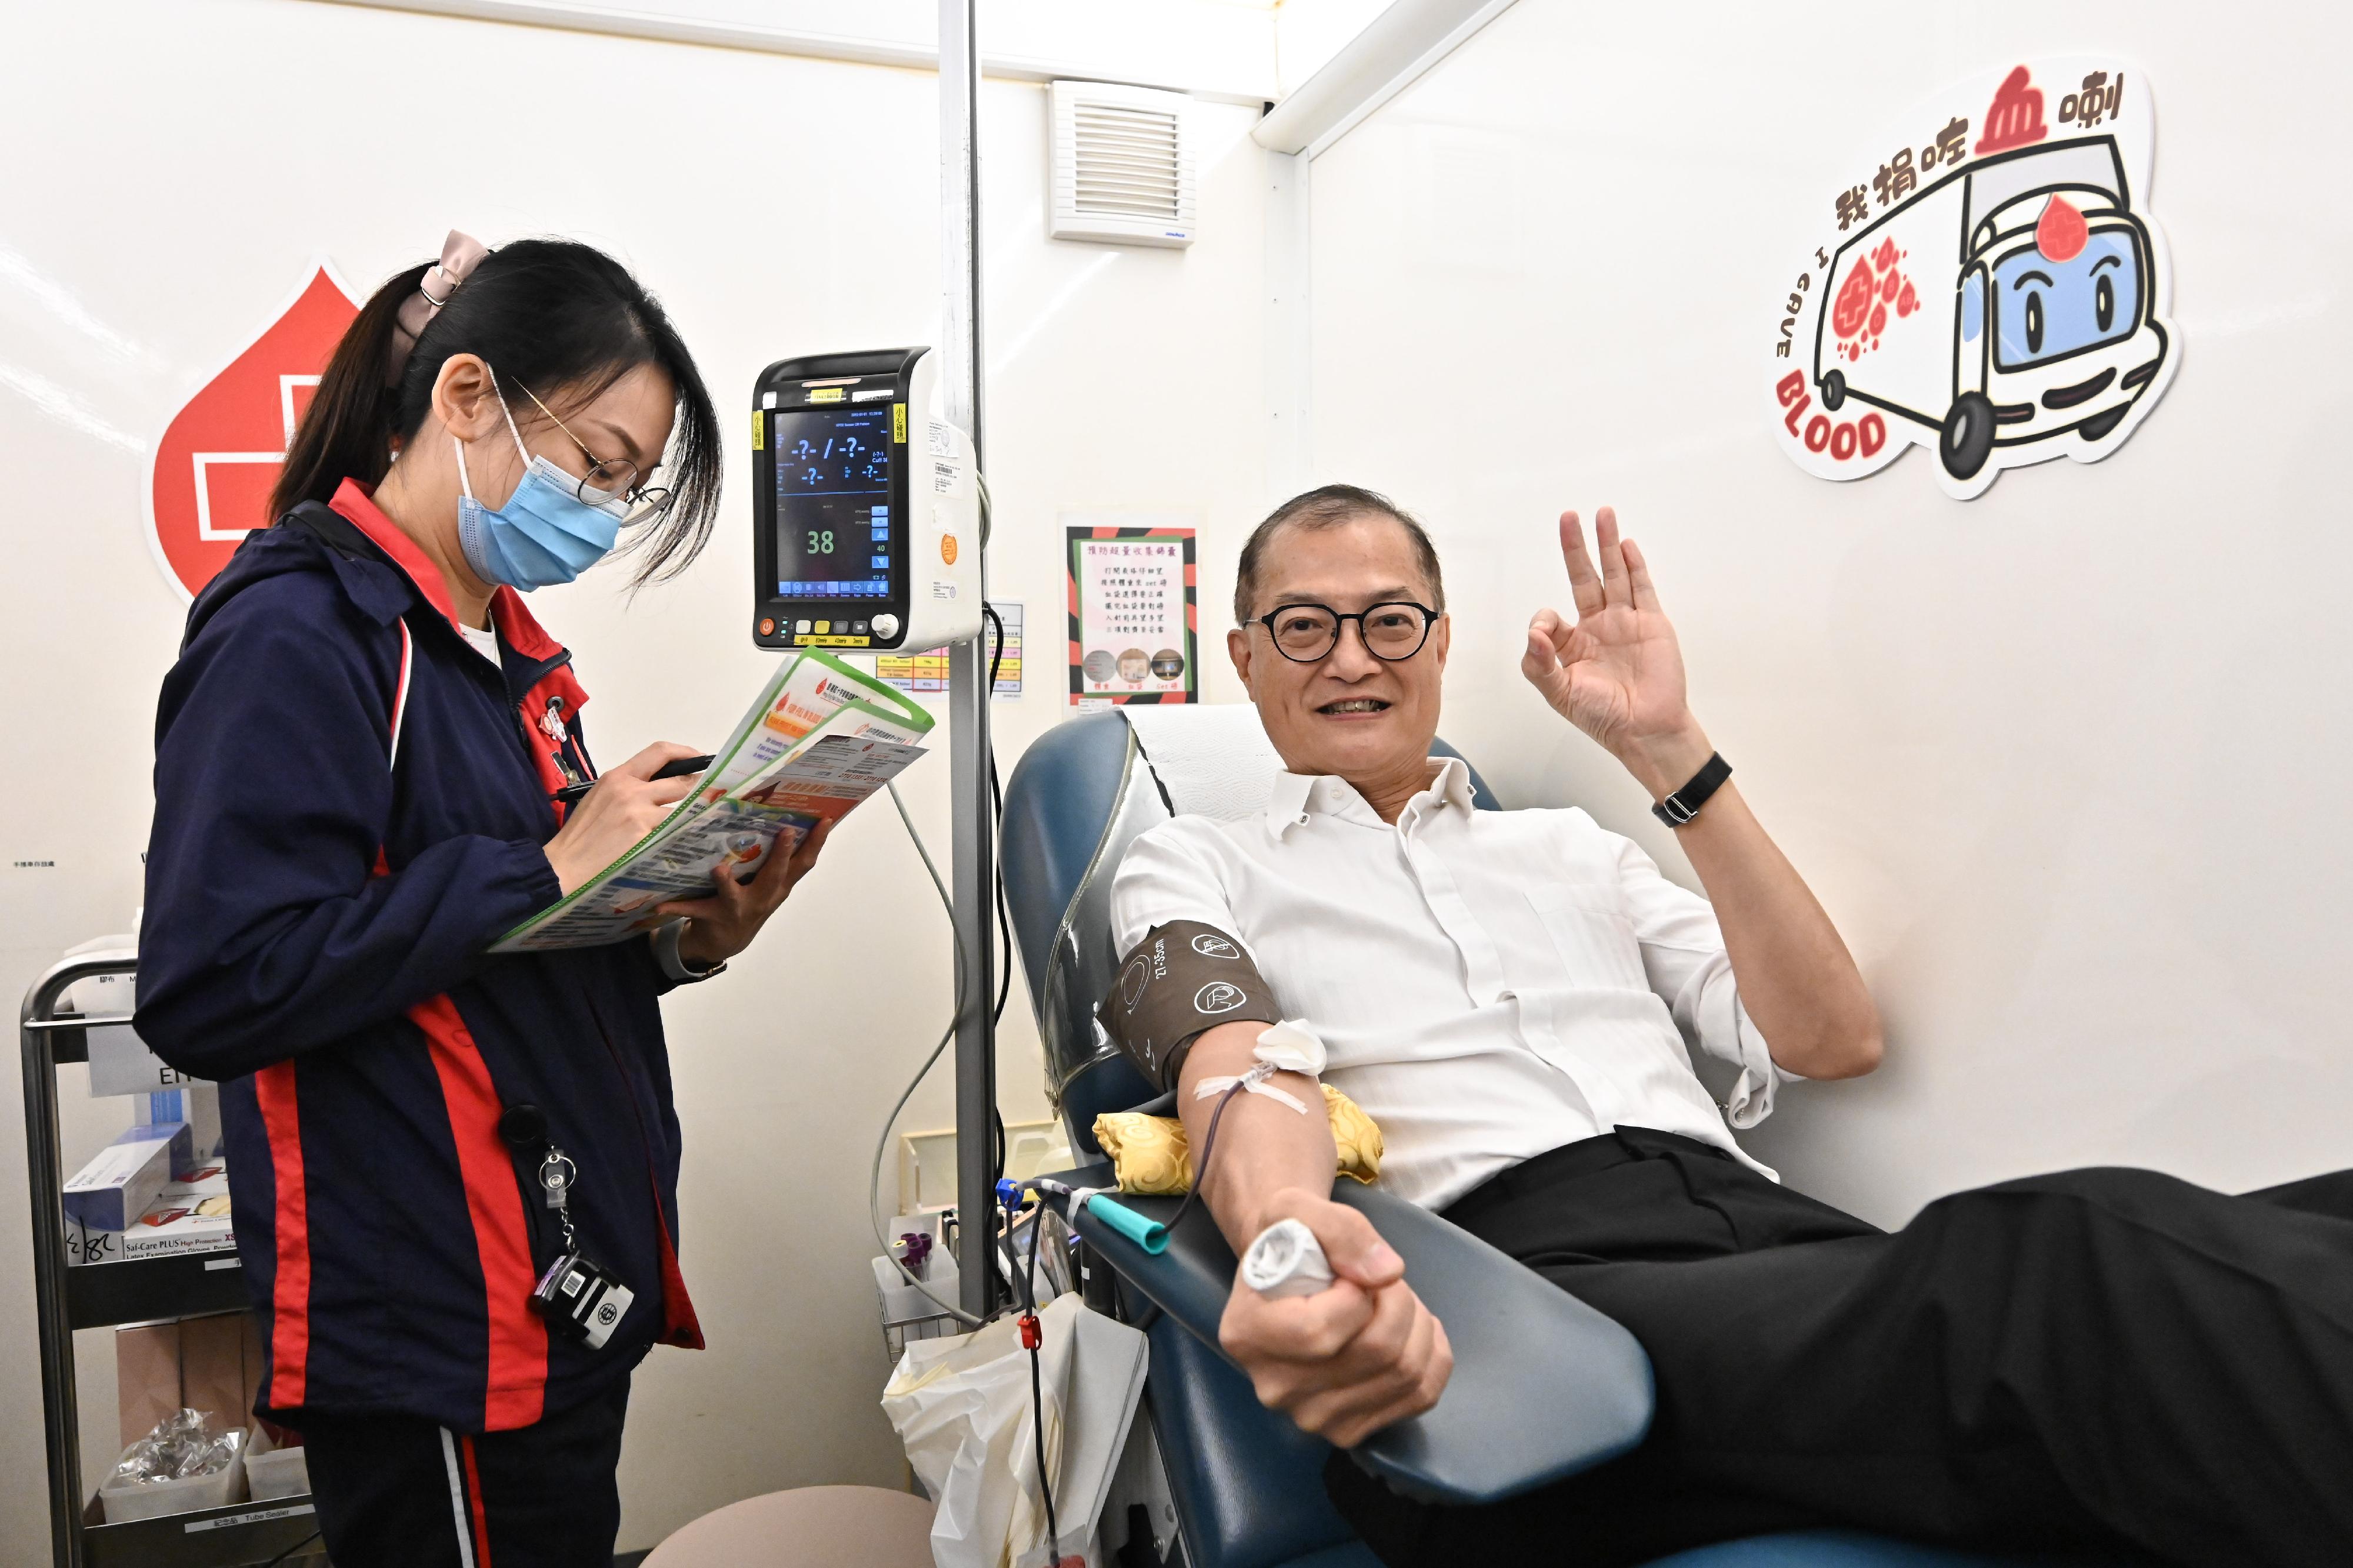 The Secretary for Health, Professor Lo Chung-mau (right), donates blood on the mobile blood donation vehicle of the Hong Kong Red Cross Blood Transfusion Service parked at the Central Government Offices today (August 14) to do his bit to rescue patients in need.